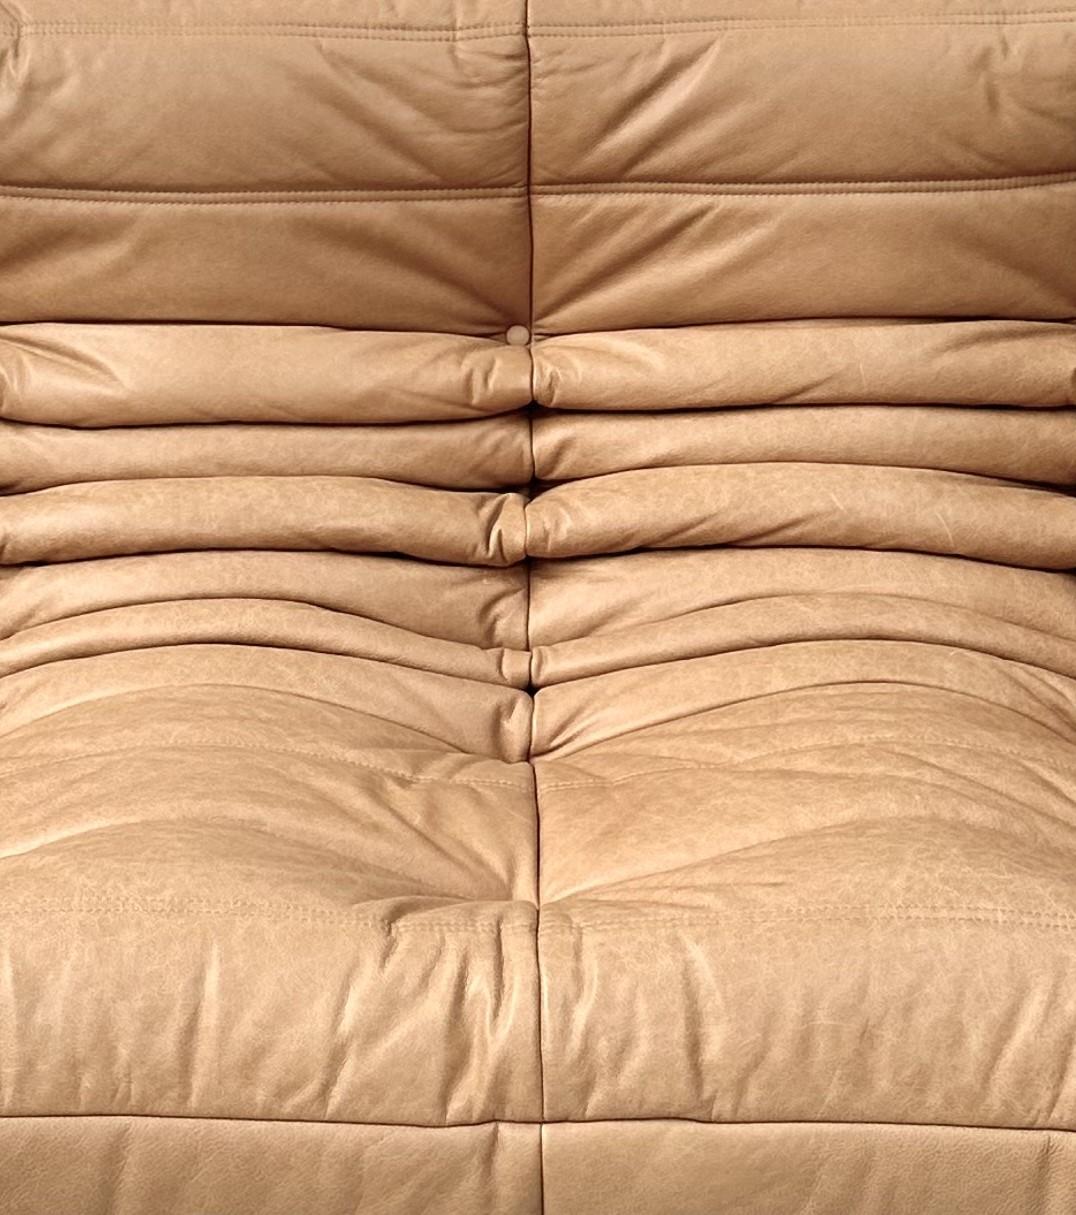 Mid-Century Modern French Togo Sofa in Camel Leather by Michel Ducaroy for Ligne Roset. For Sale